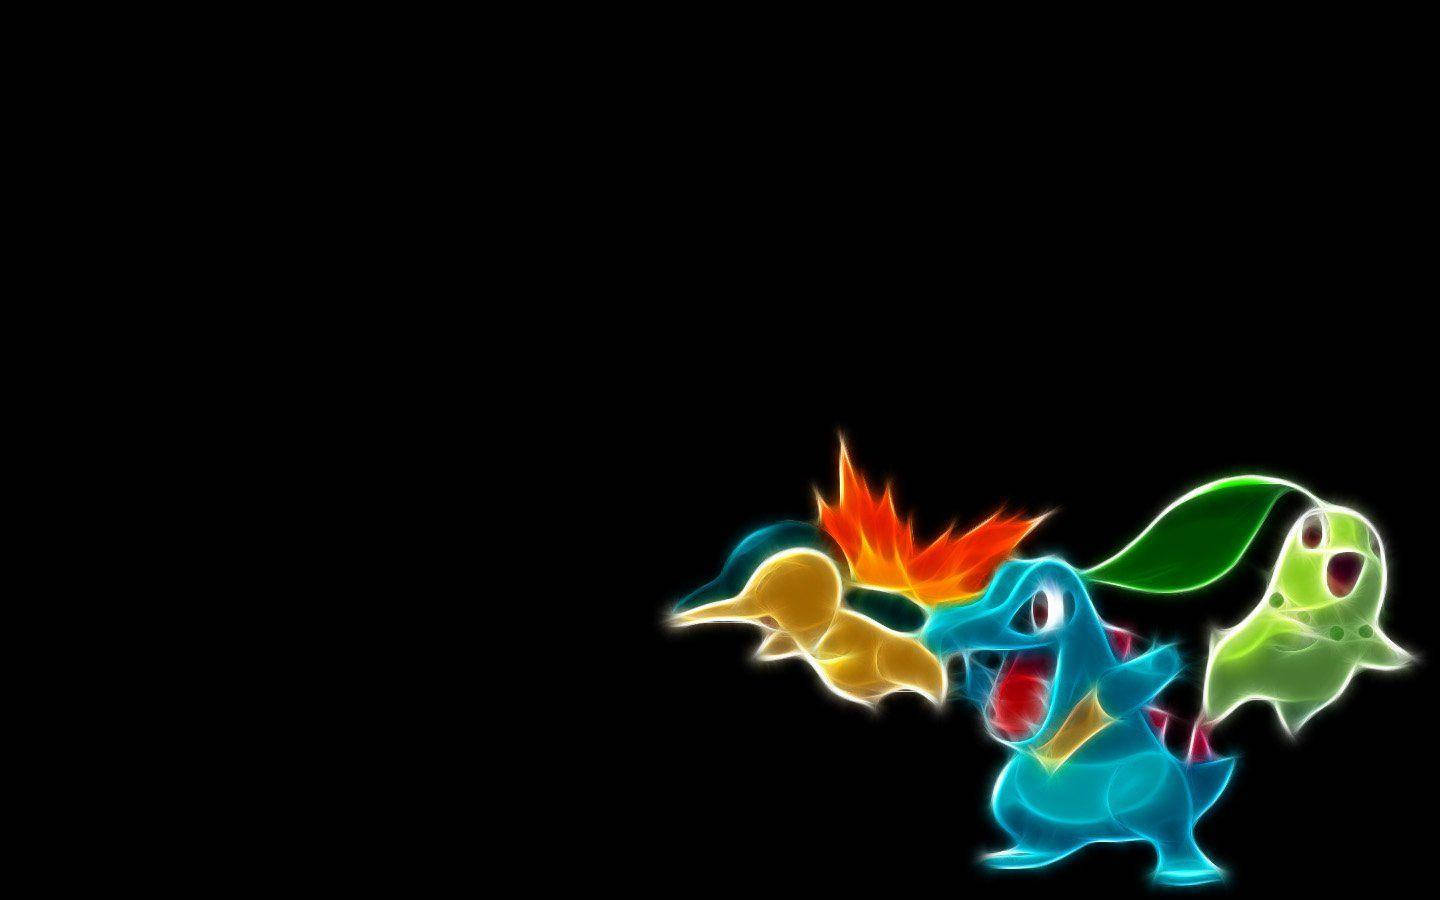 Cyndaquil, Totodile And Chikorita Wallpaper